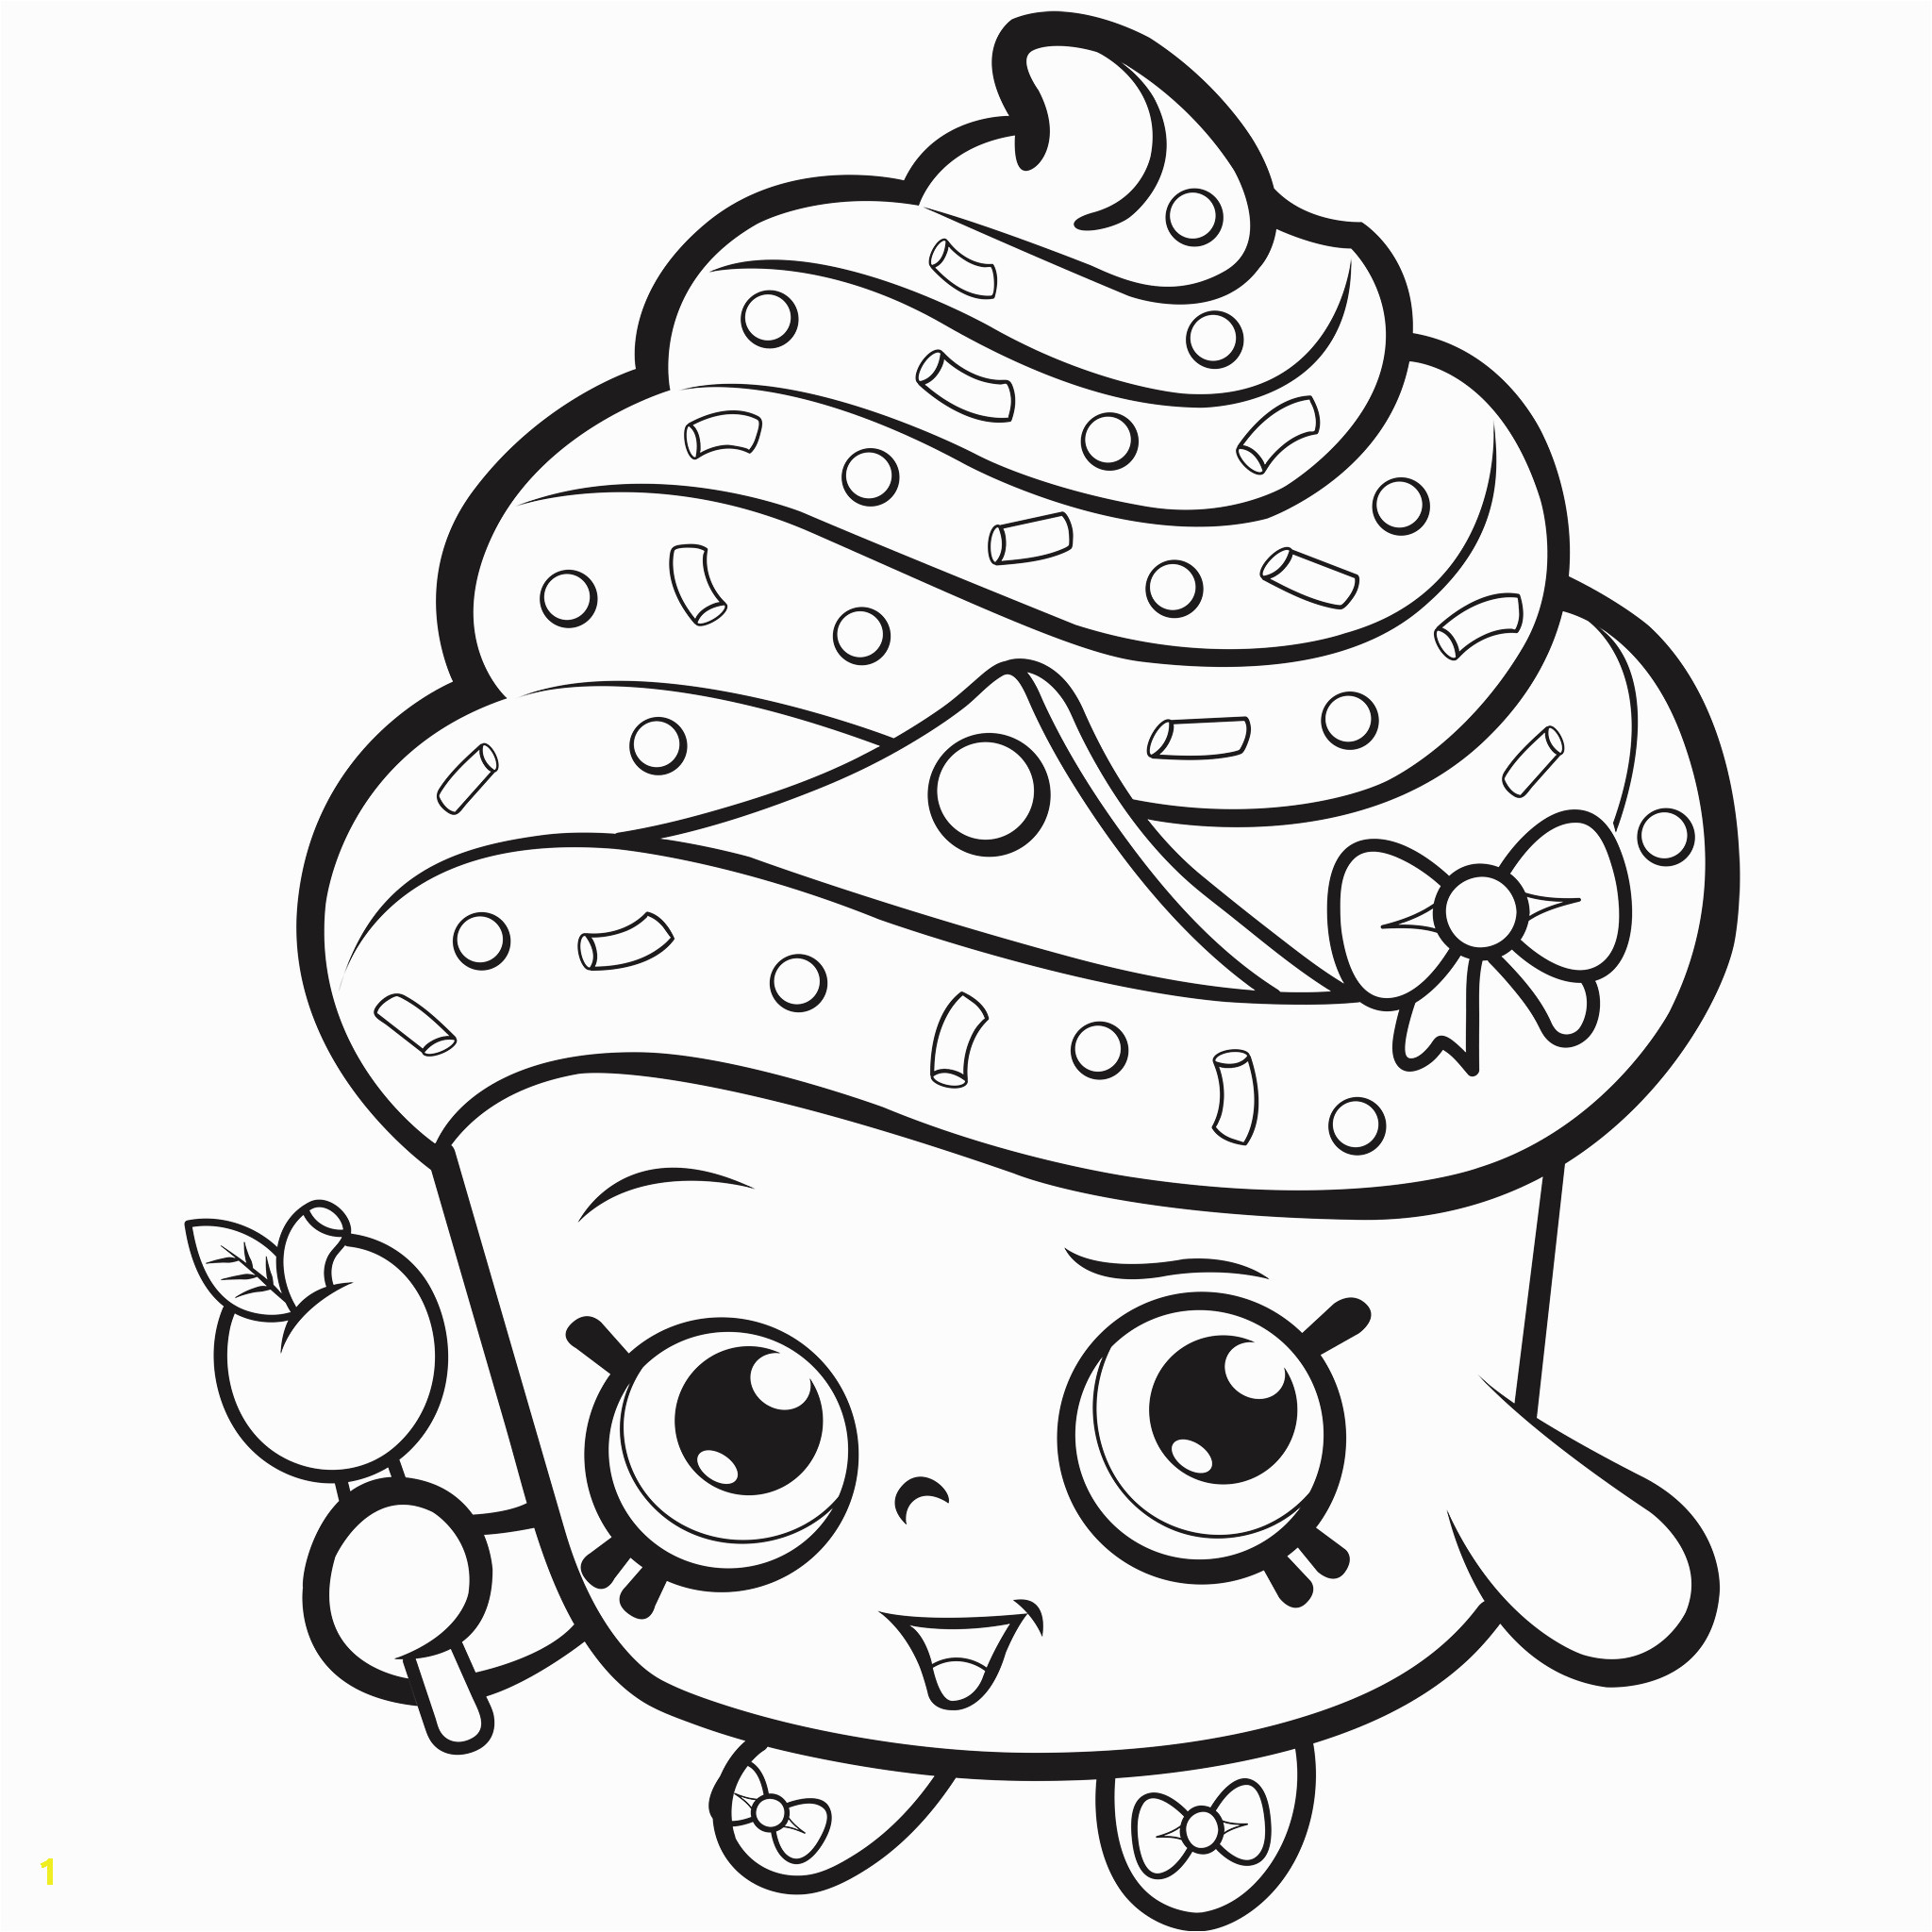 Coloring Pages Of Shopkins to Print Shopkins Coloring Pages Best Coloring Pages for Kids